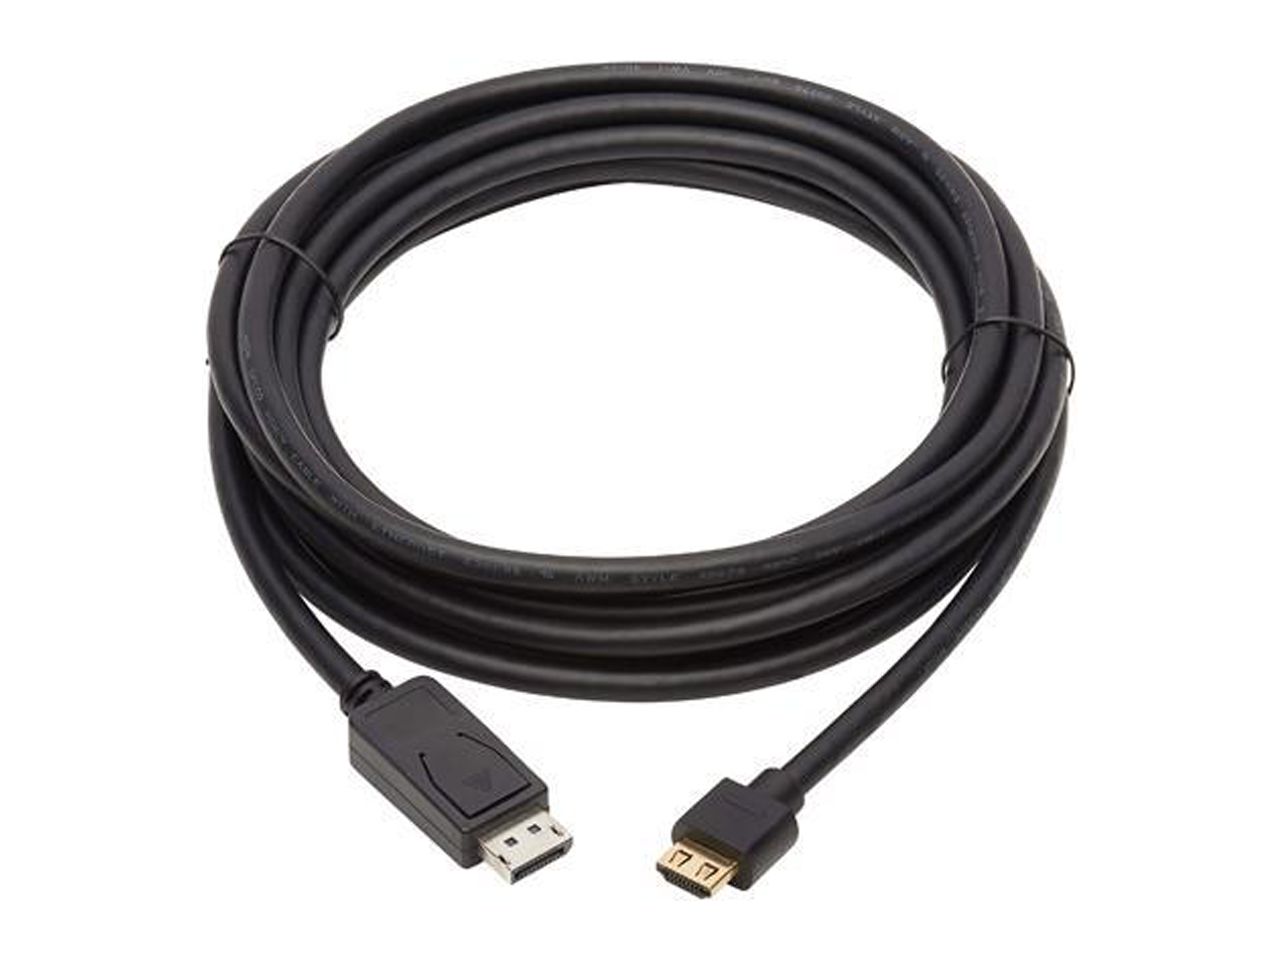 Tripp Lite P582-010-4K6AE 10 ft. DisplayPort 1.2a to HDMI 2.0 Active Adapter Cable (M/M) - Grip HDMI Plug, 4K @ 60 Hz, 10 ft., Black - image 2 of 5